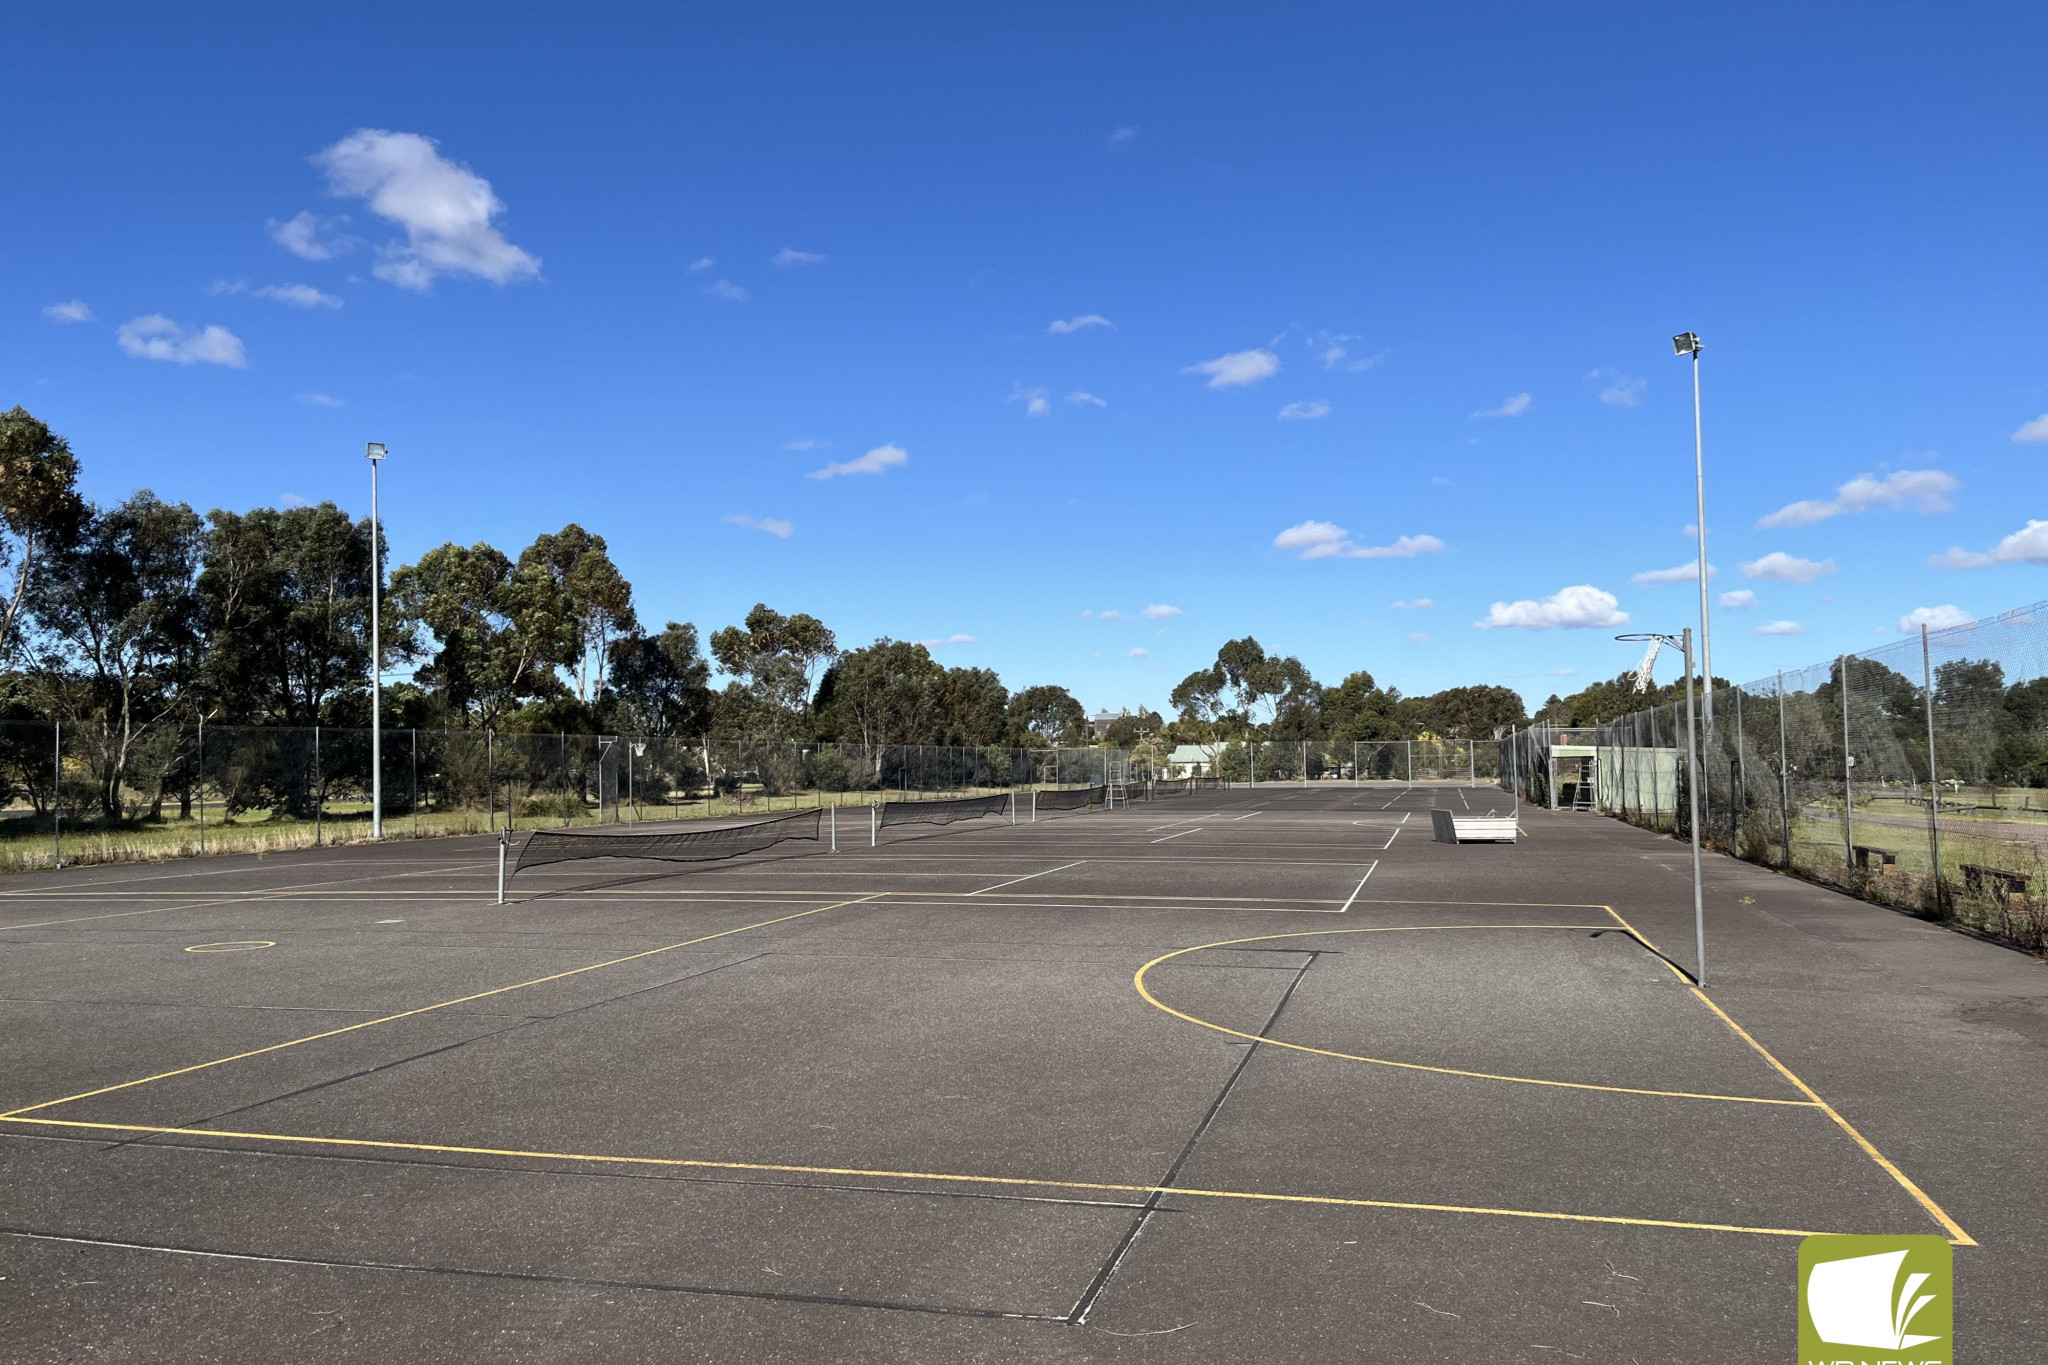 Works to start: Works to resurface two courts at Wilson’s DC Farran Oval will soon begin, bringing the courts in line with modern standards and beginning the first stage of a major revitalisation project planned for the area.